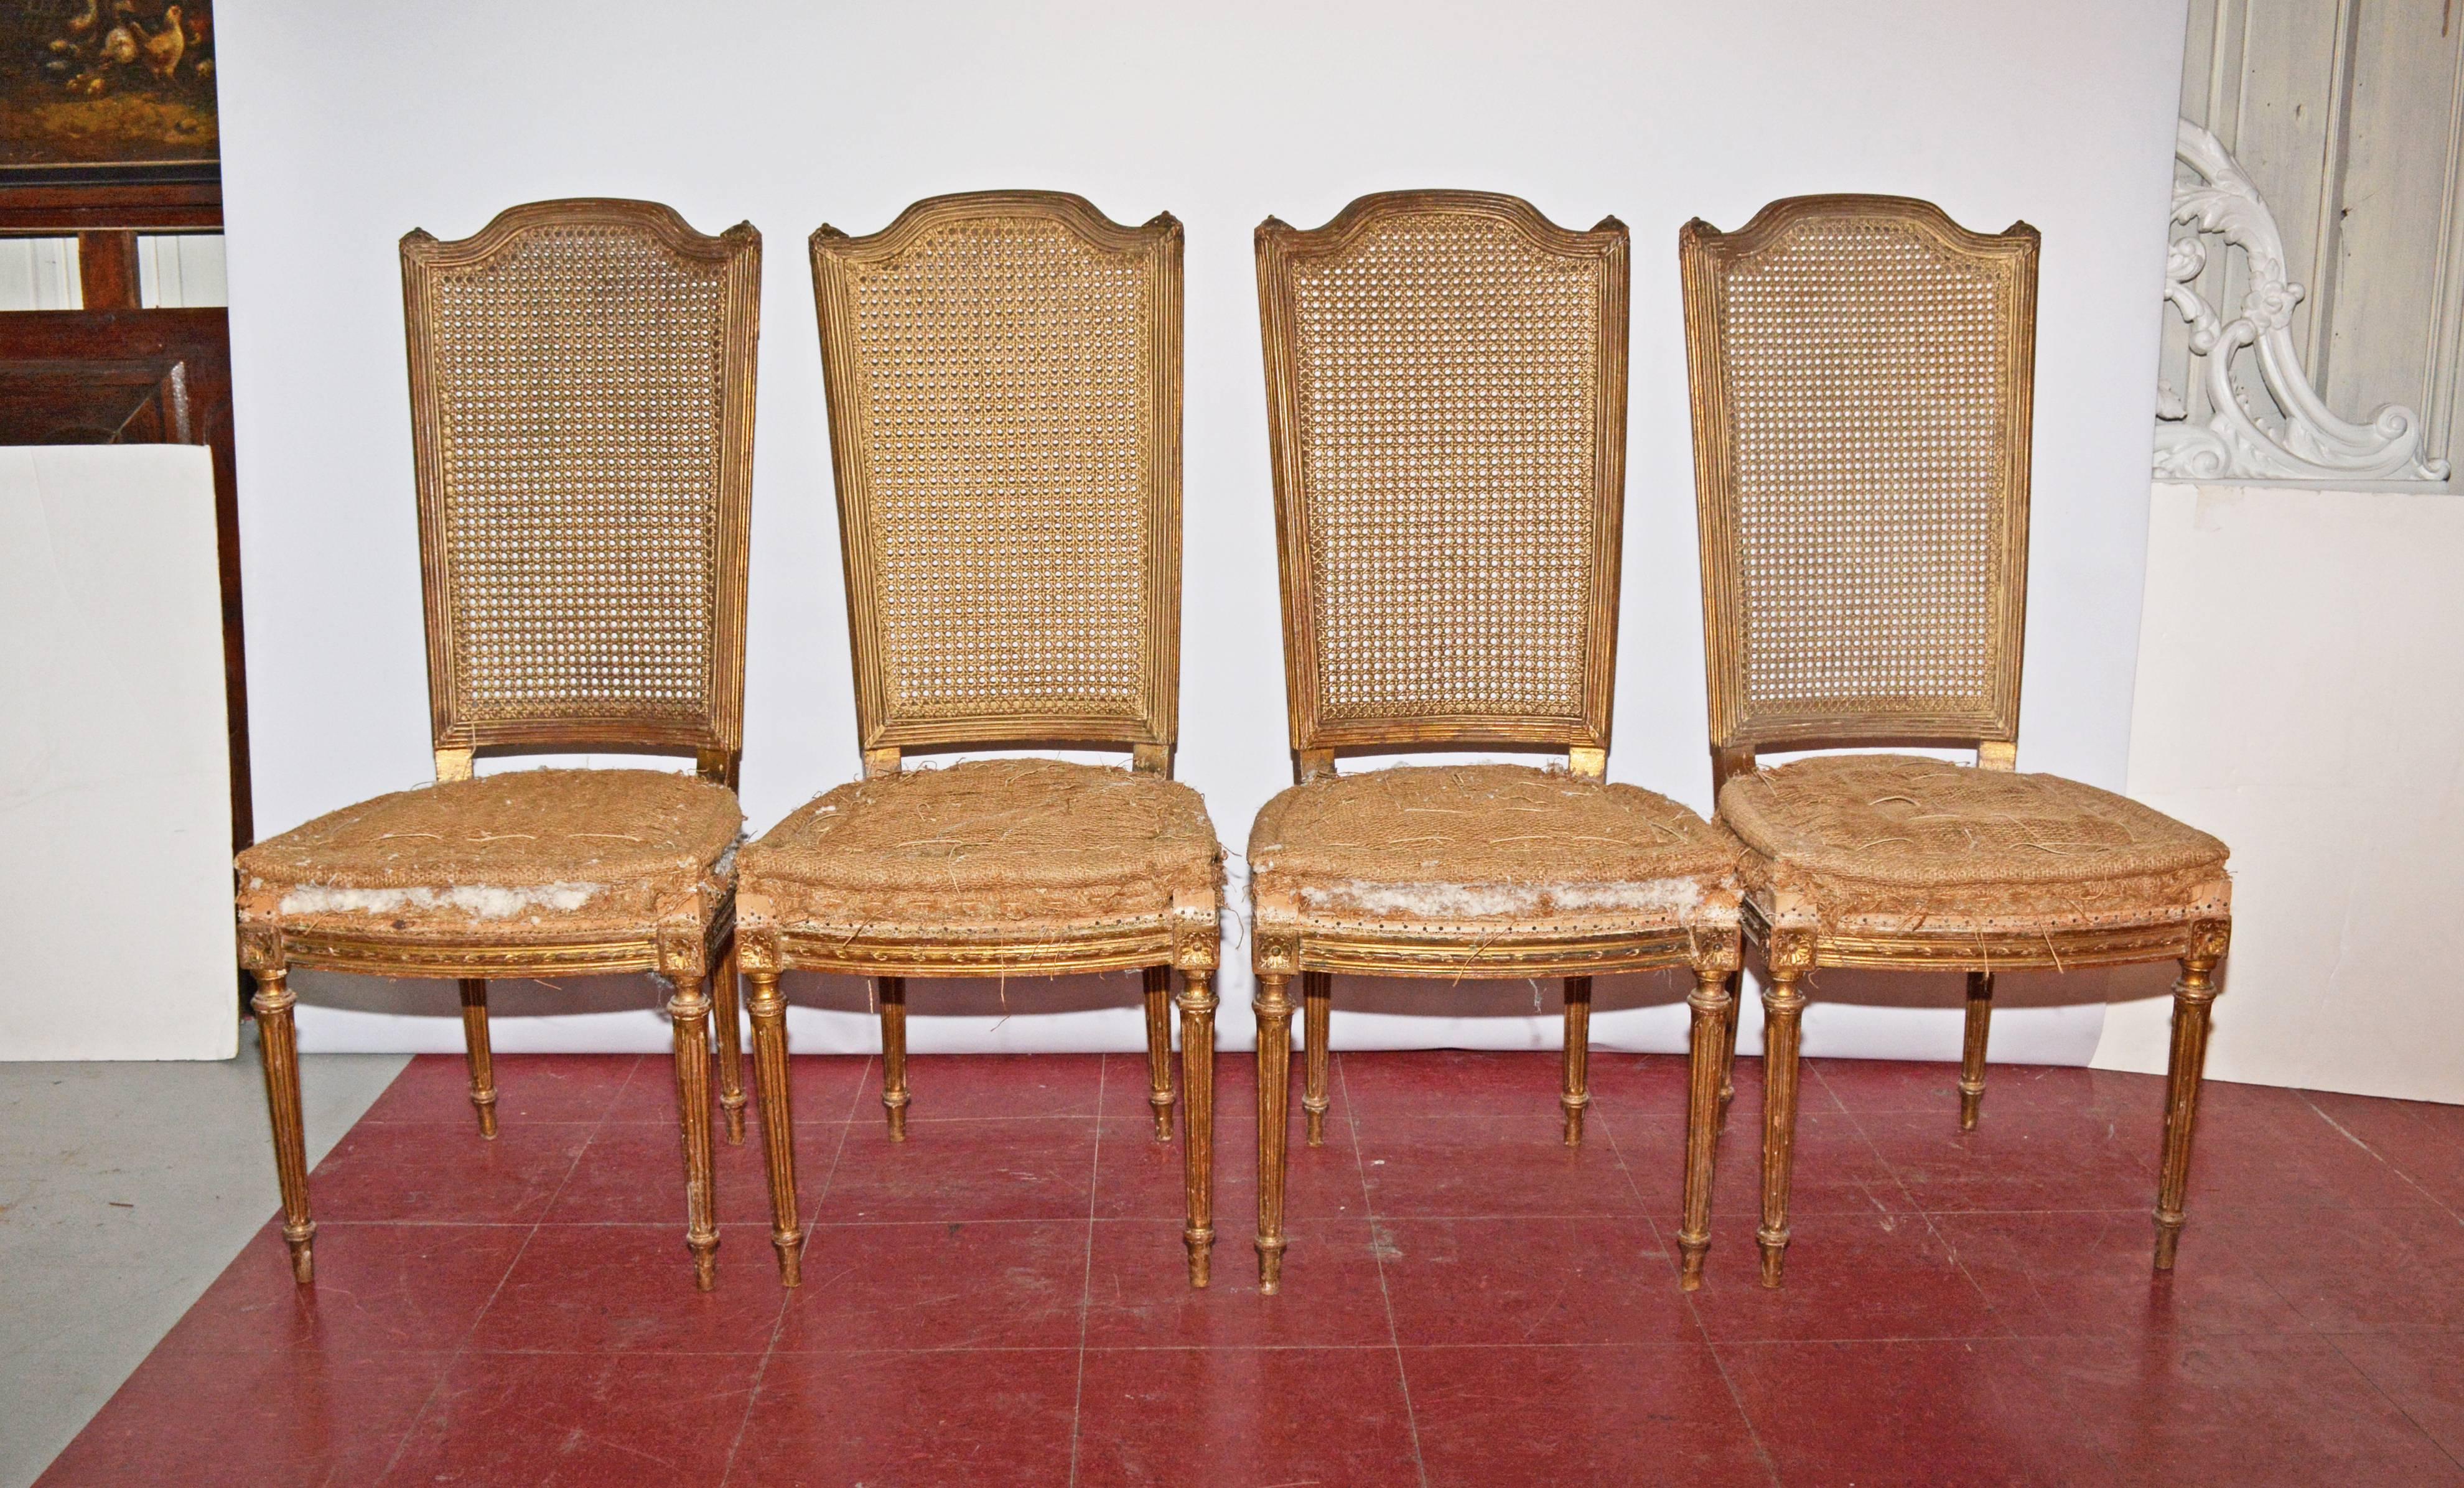 The four classic Louis XVI style dining chairs painted gold have fluted legs topped by squared rosettes, cane backs inset in ribbed frames. The seats have the underpinnings for the upholstery of your choice.